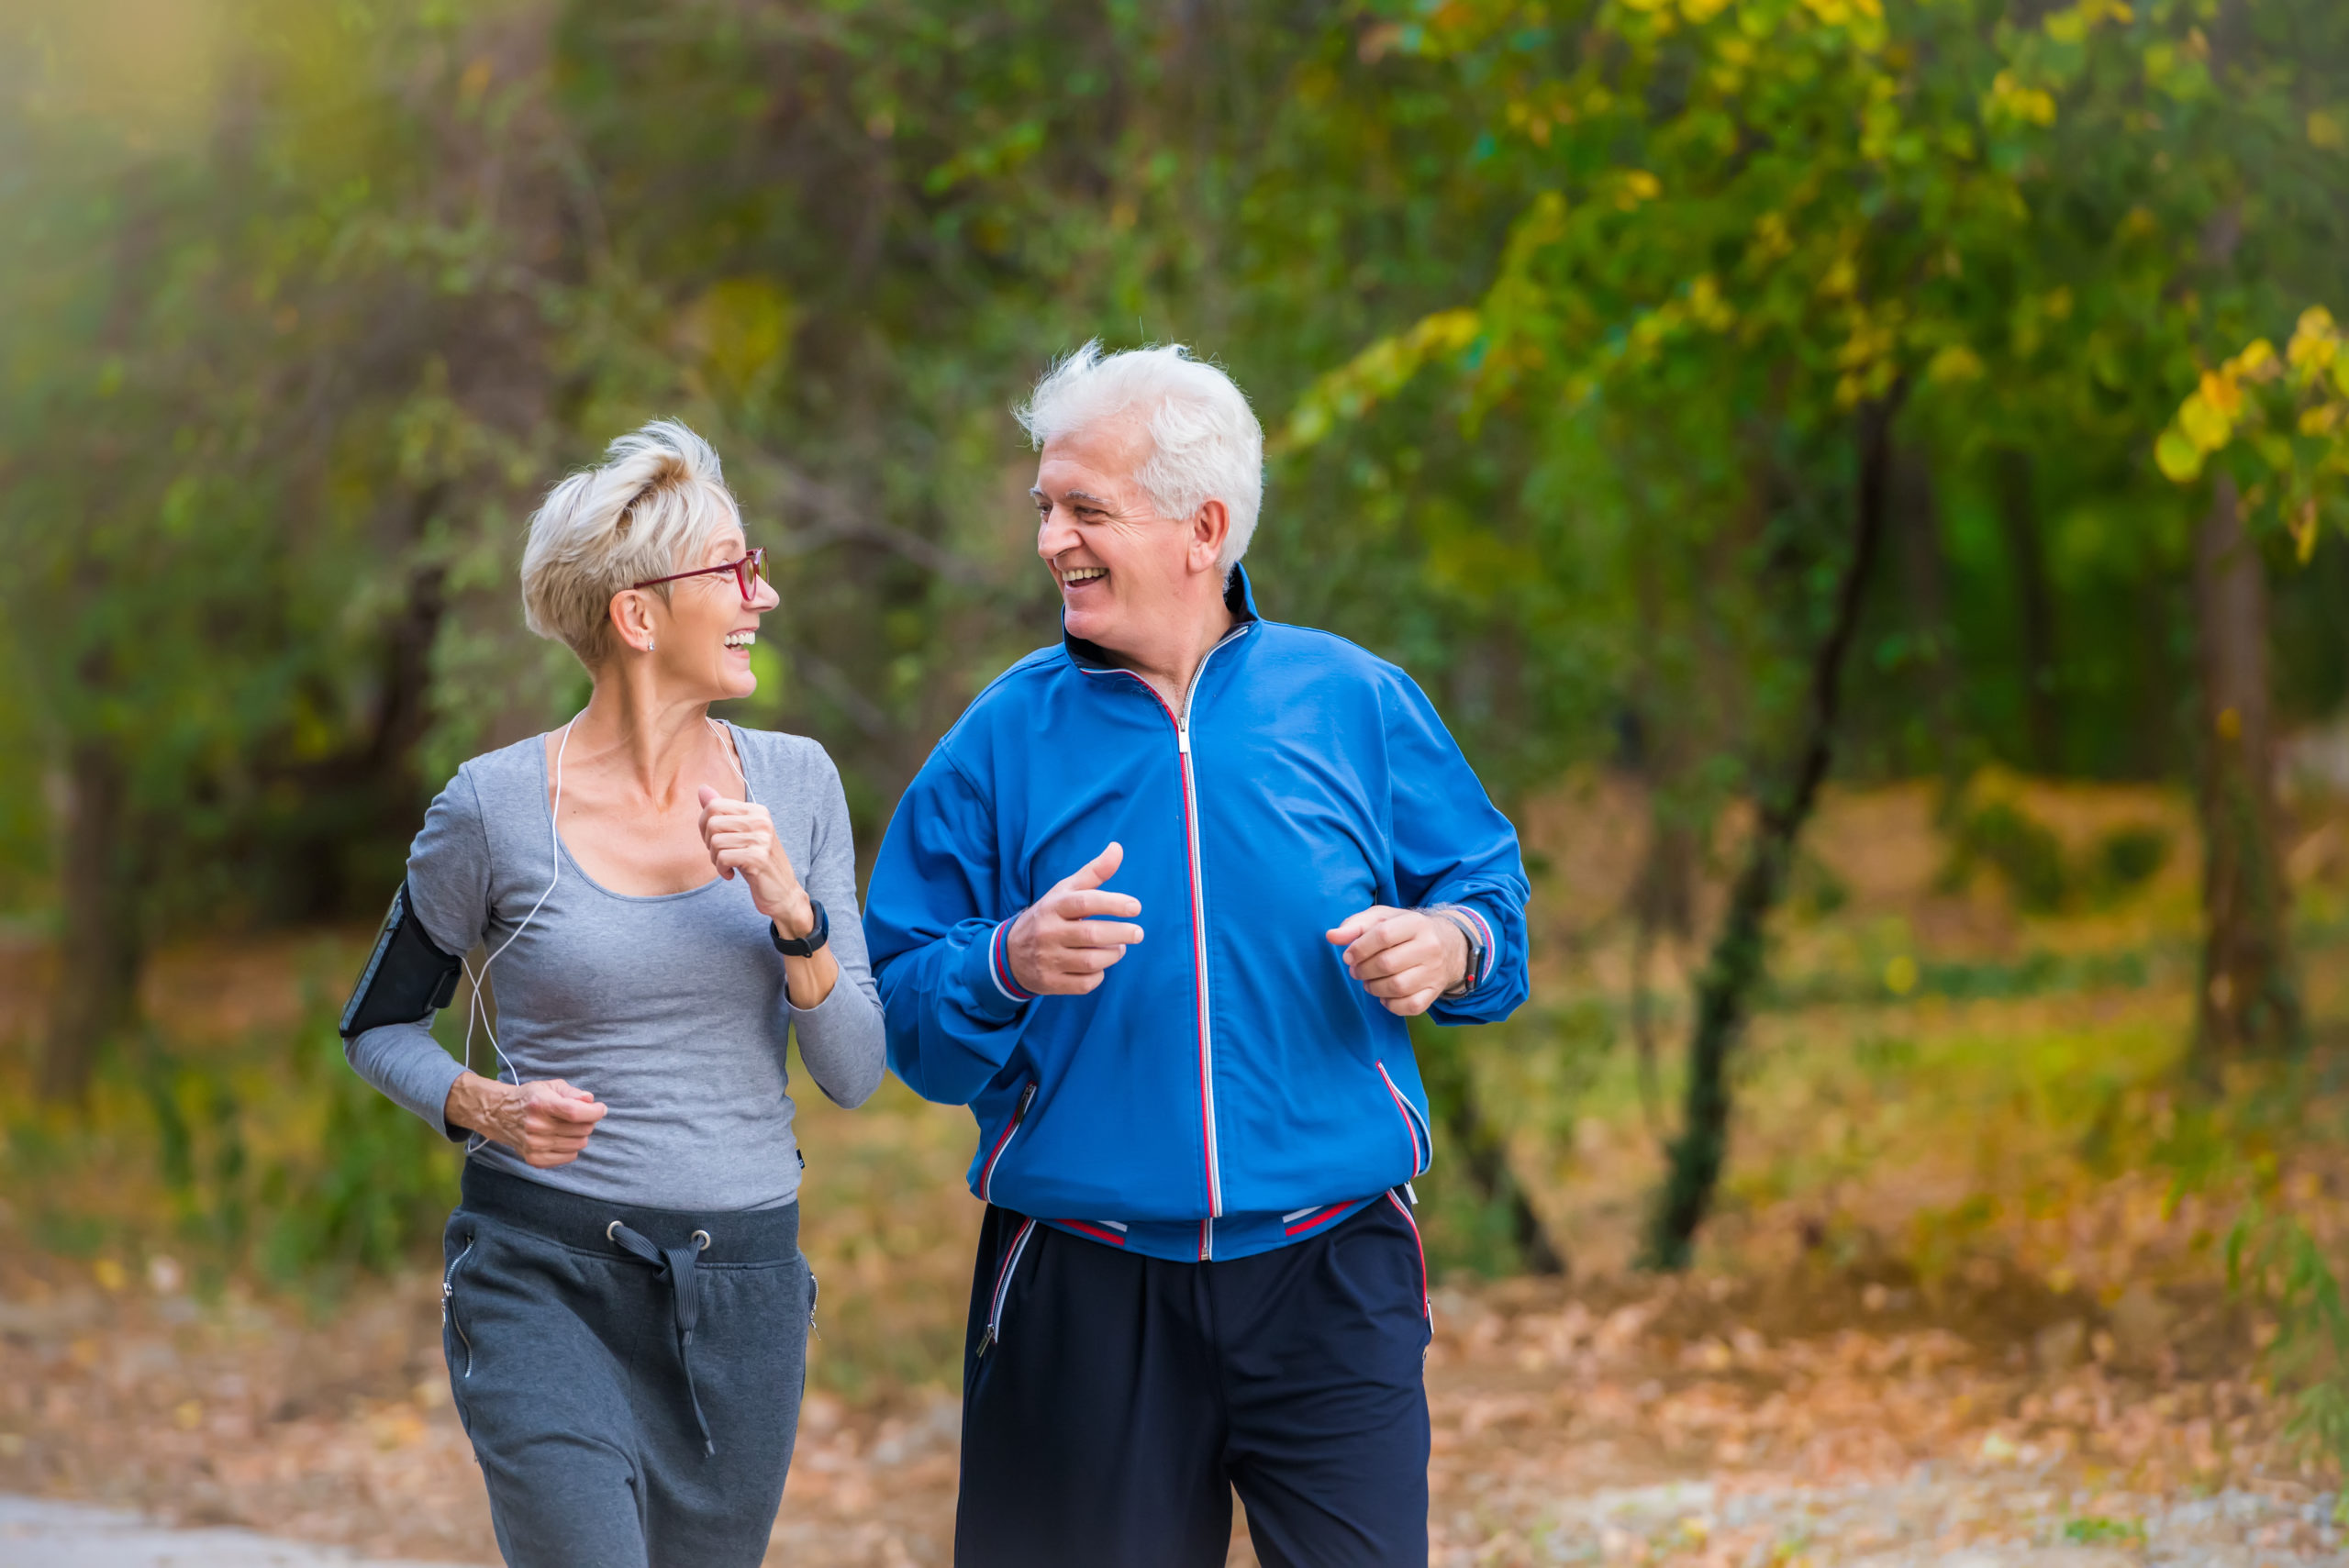 Smiling senior active couple jogging together in the park